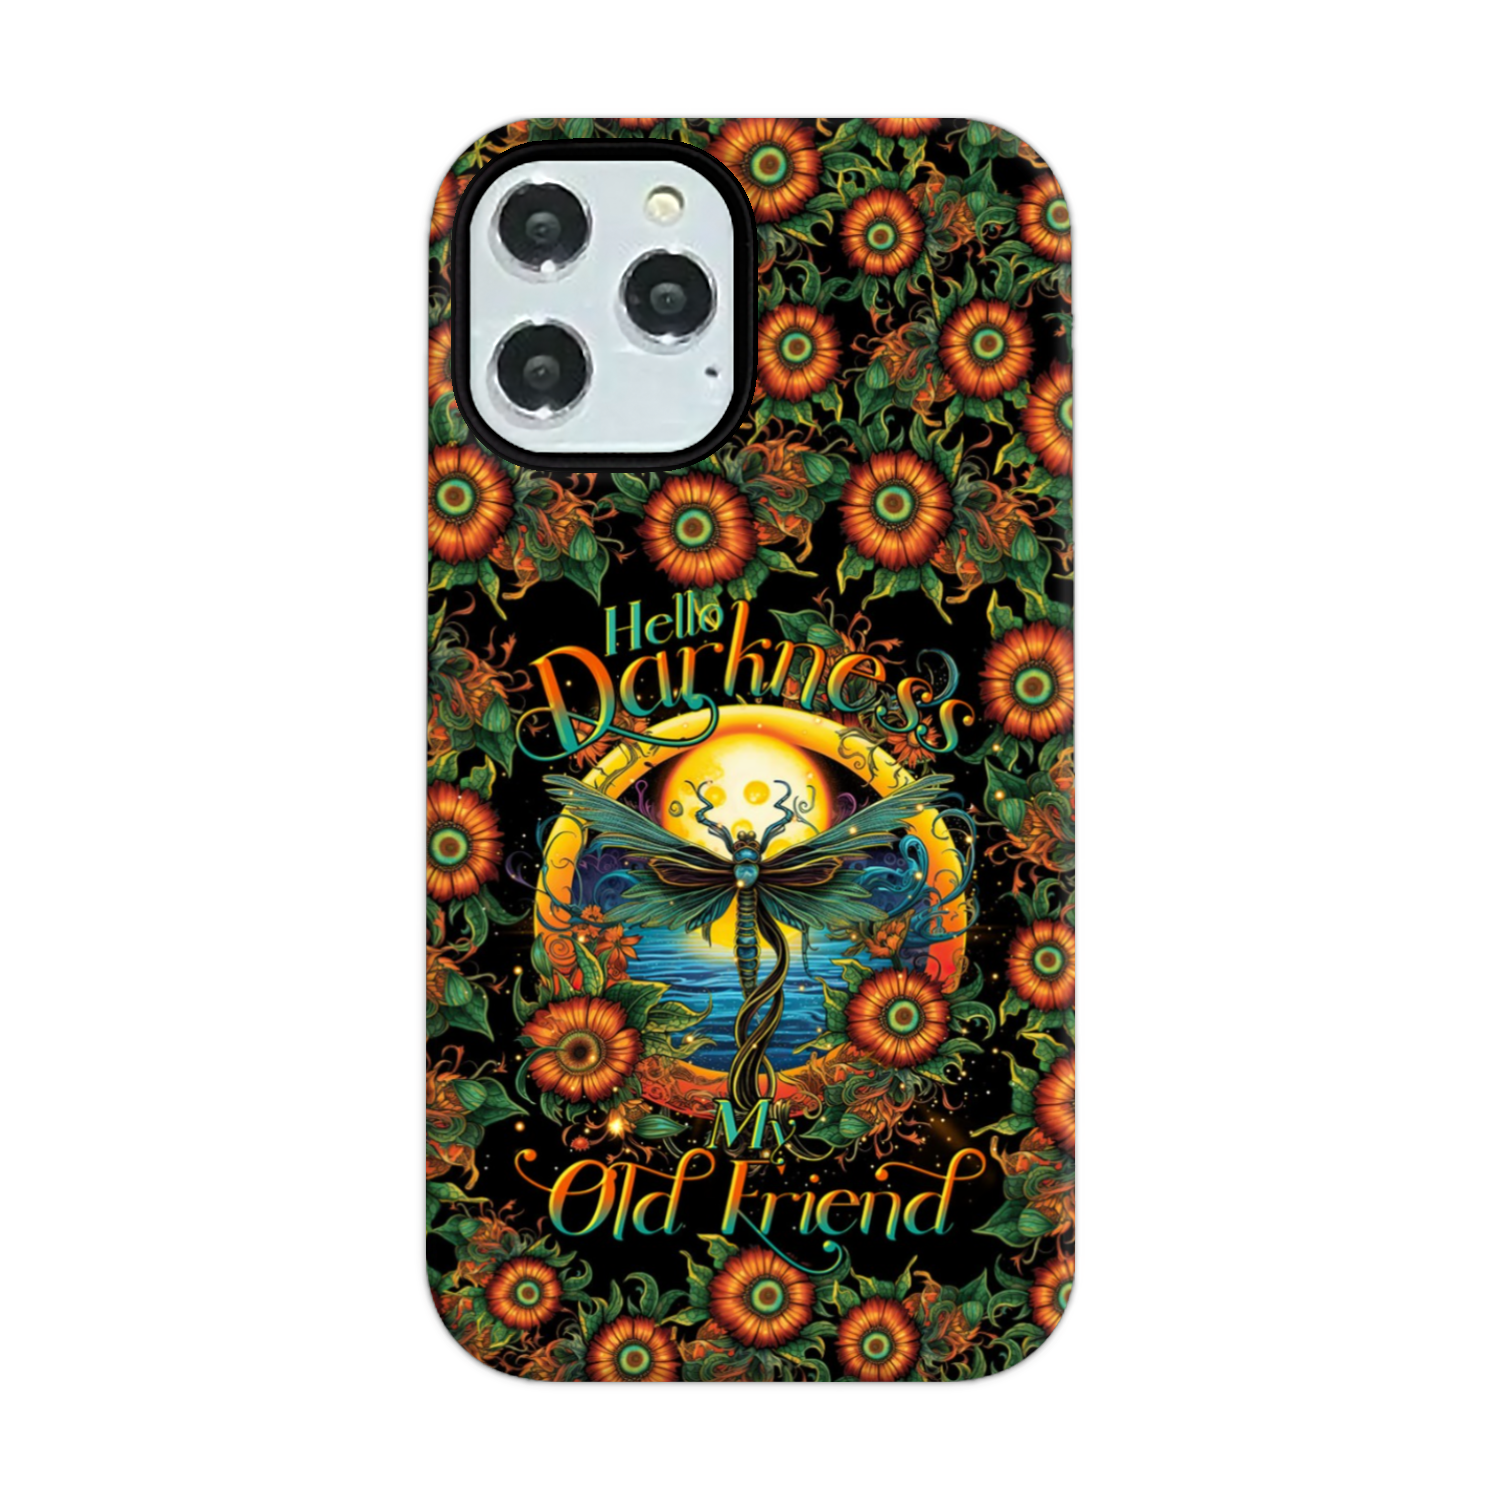 HELLO DARKNESS MY OLD FRIEND DRAGONFLY PHONE CASE - TLTR1007237